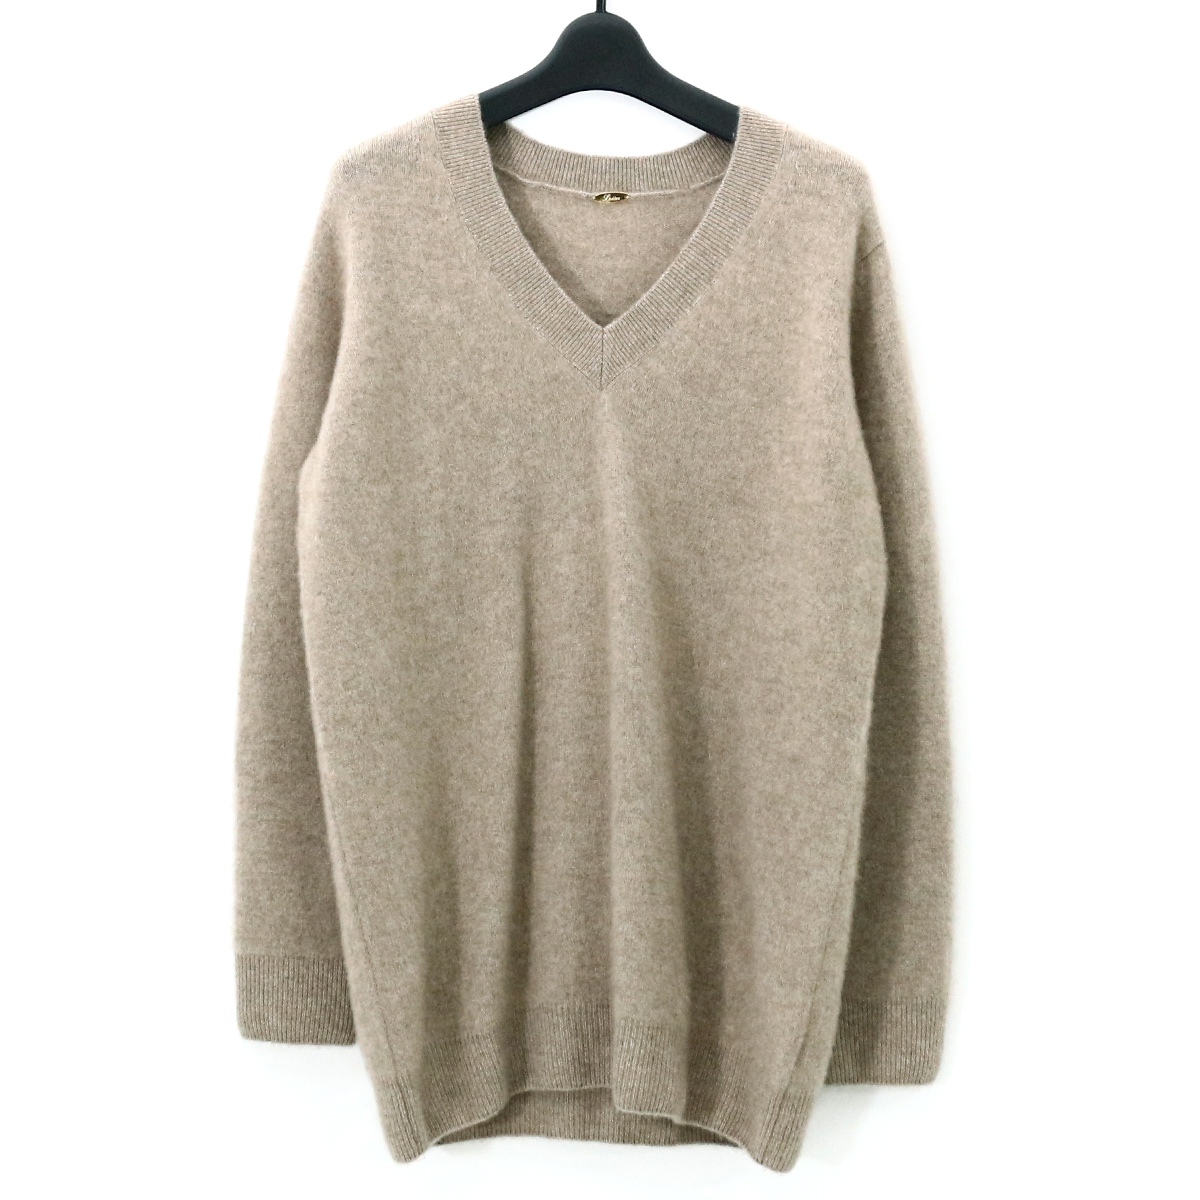 L'Appartement Lisiere アパルトモン リジエール 19AW Cashmere